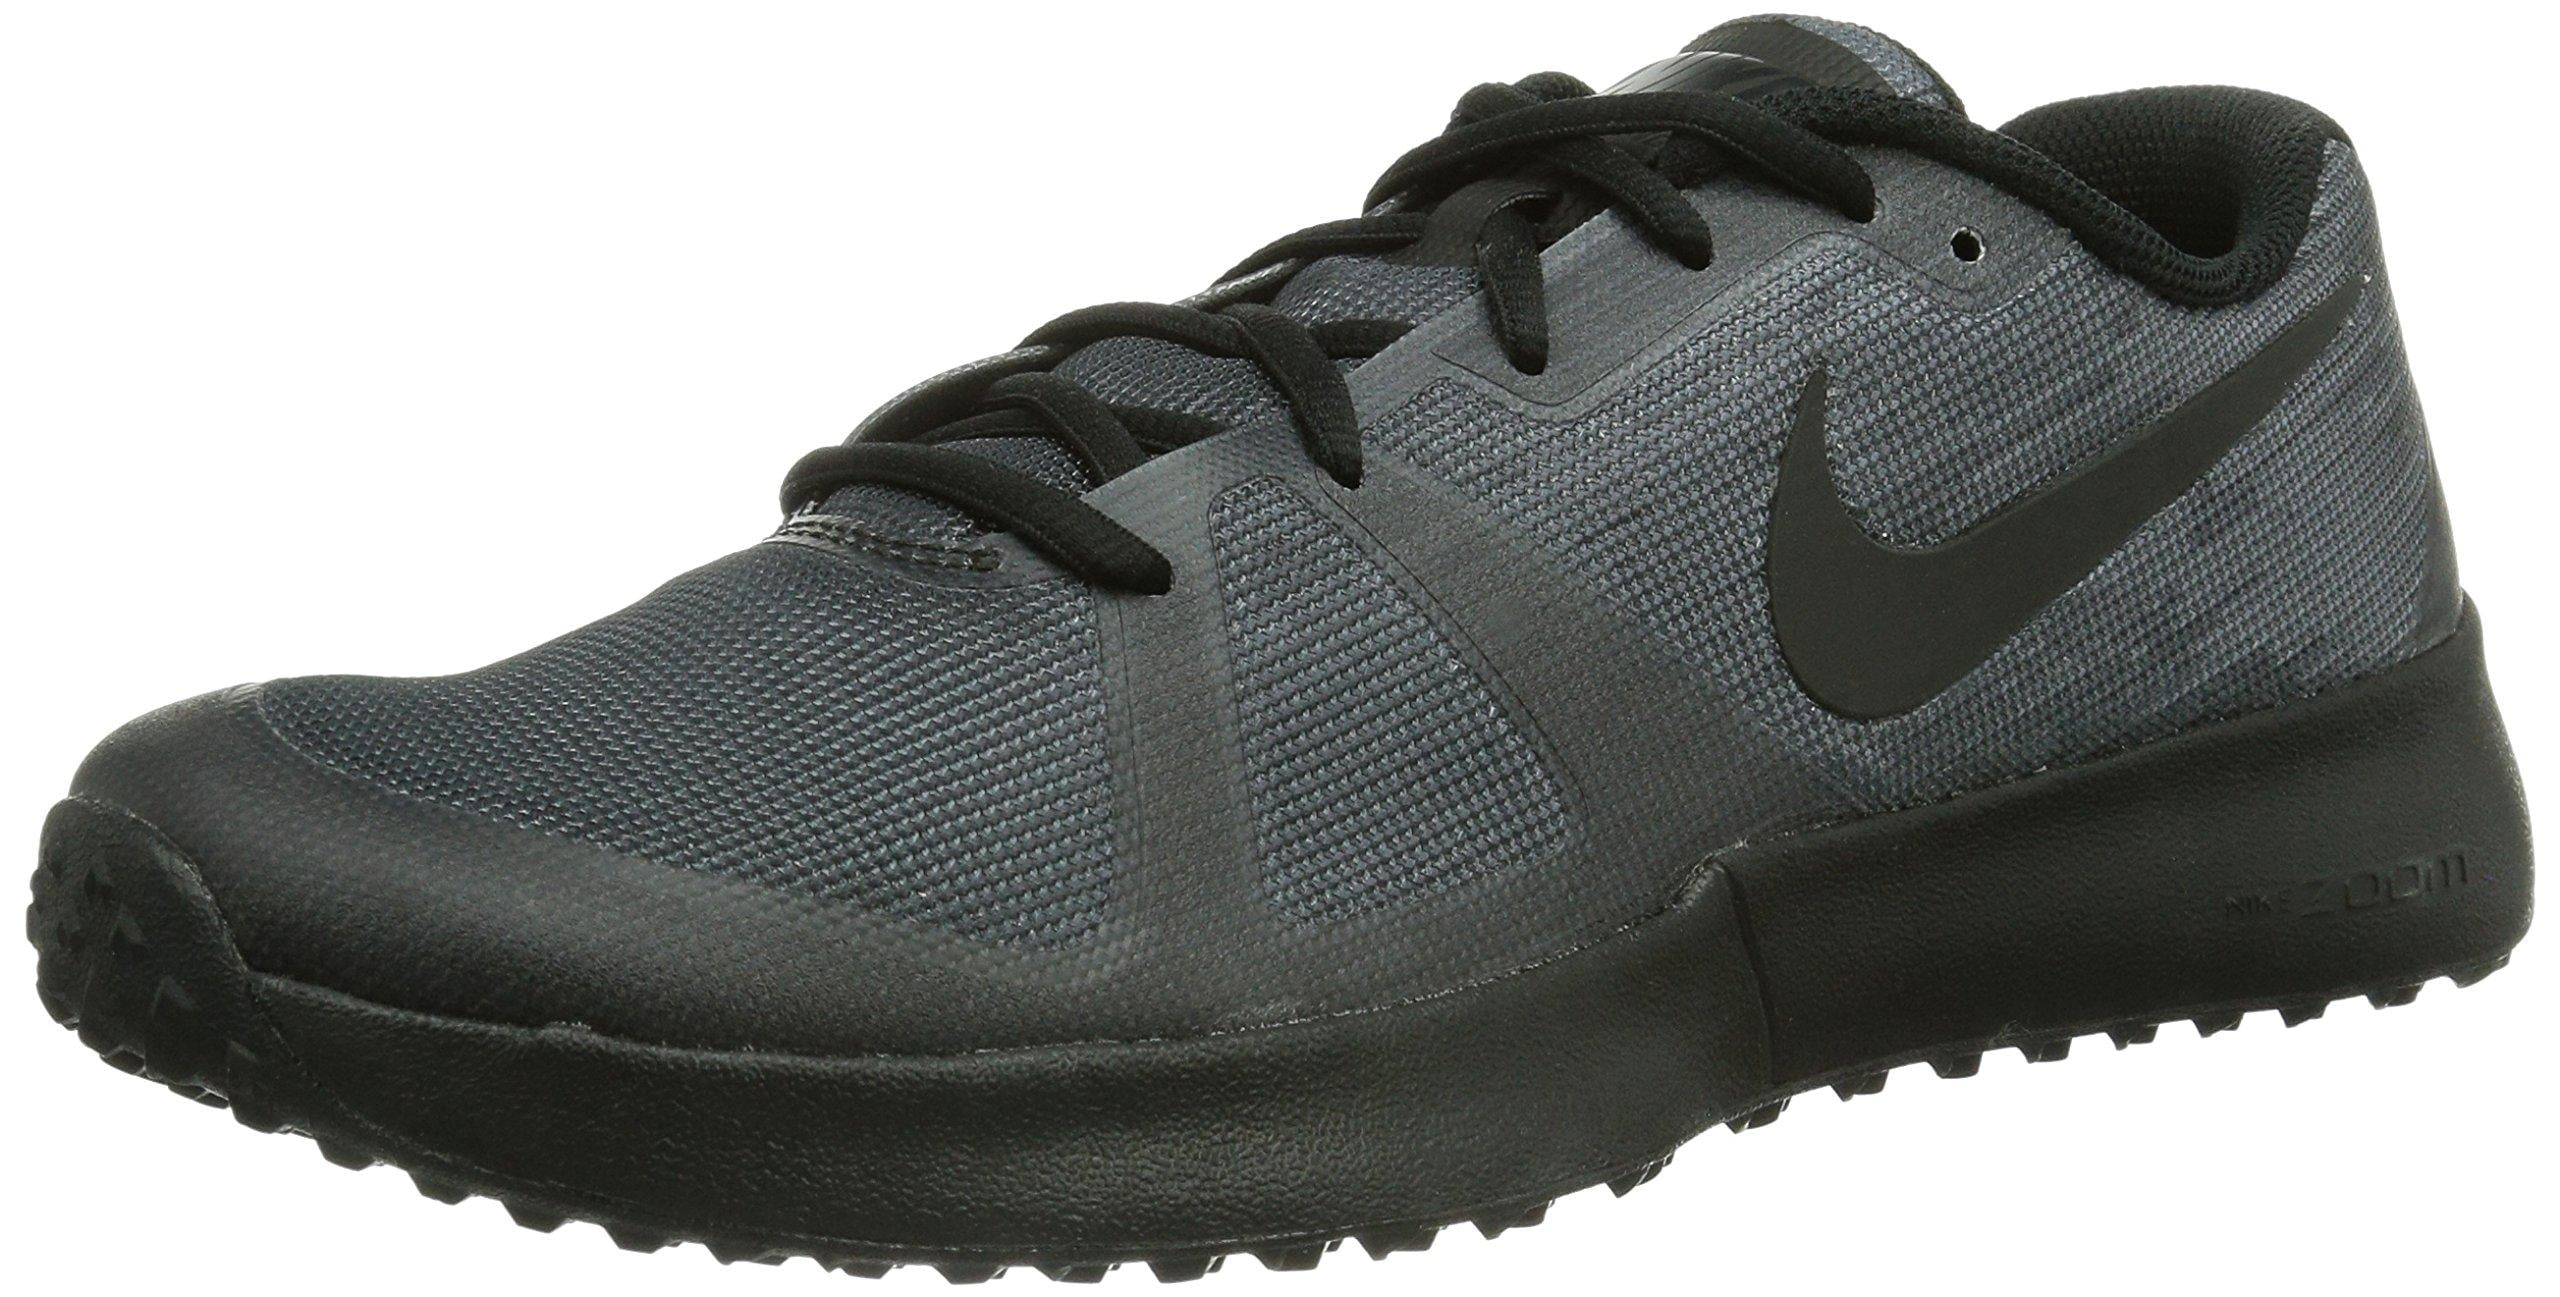 Nike - Zoom Speed TR Mens Trail Running Shoes Black 630855 001 ...